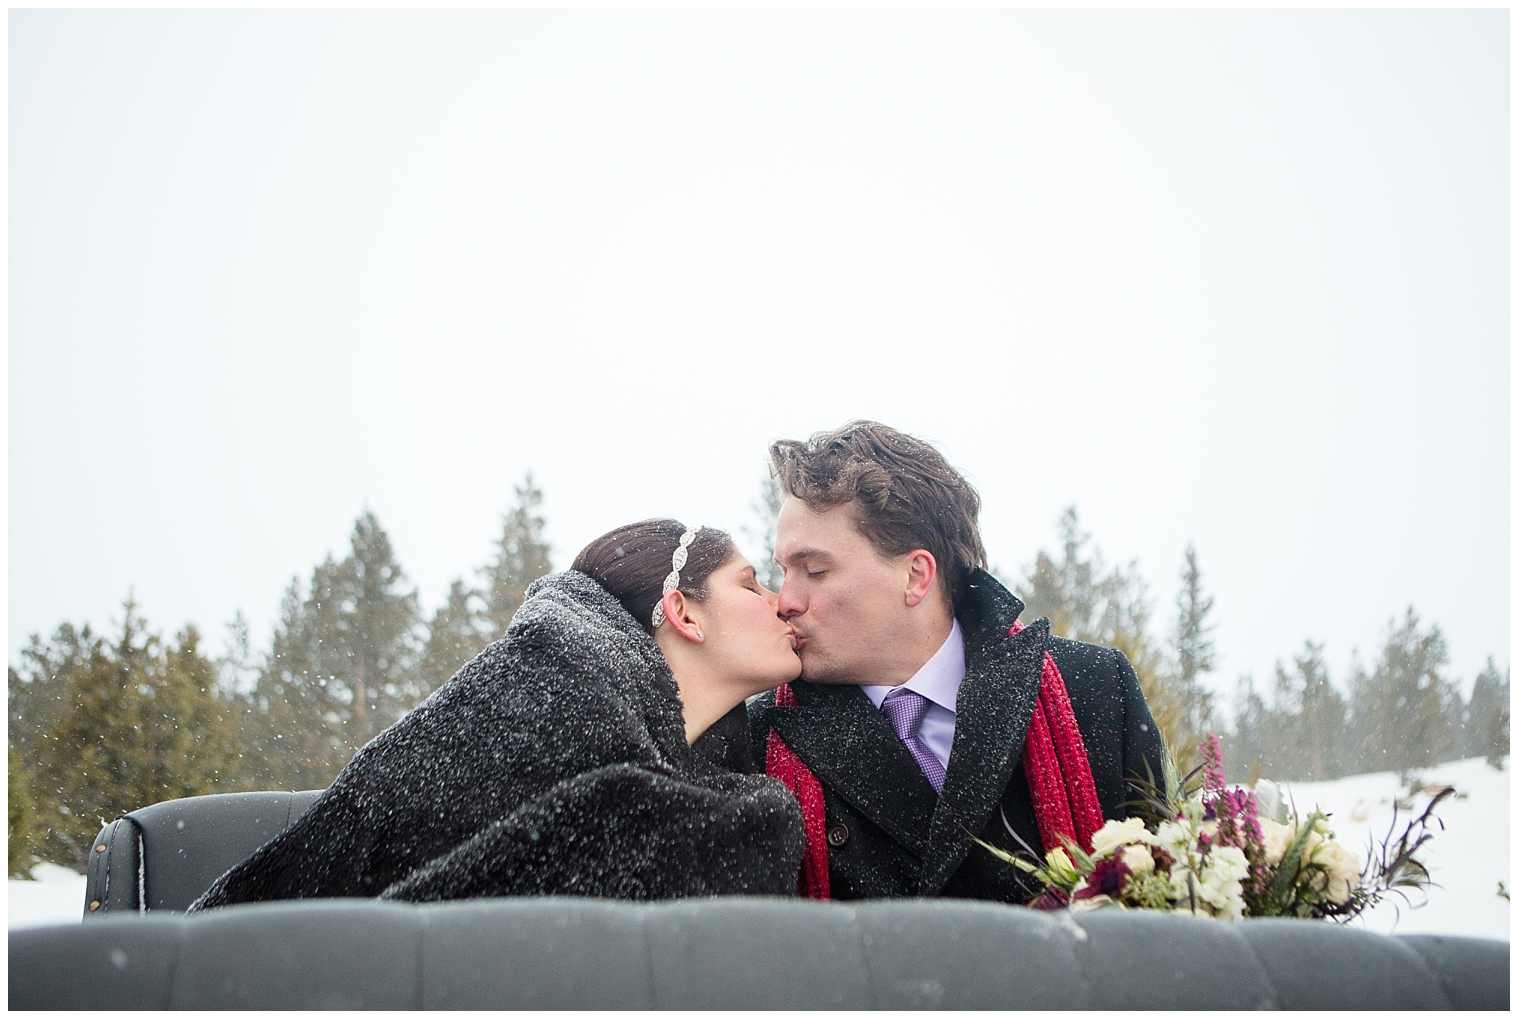 The bride and groom kiss in the carriage at their winter mountain elopement in Breckenridge Colorado.